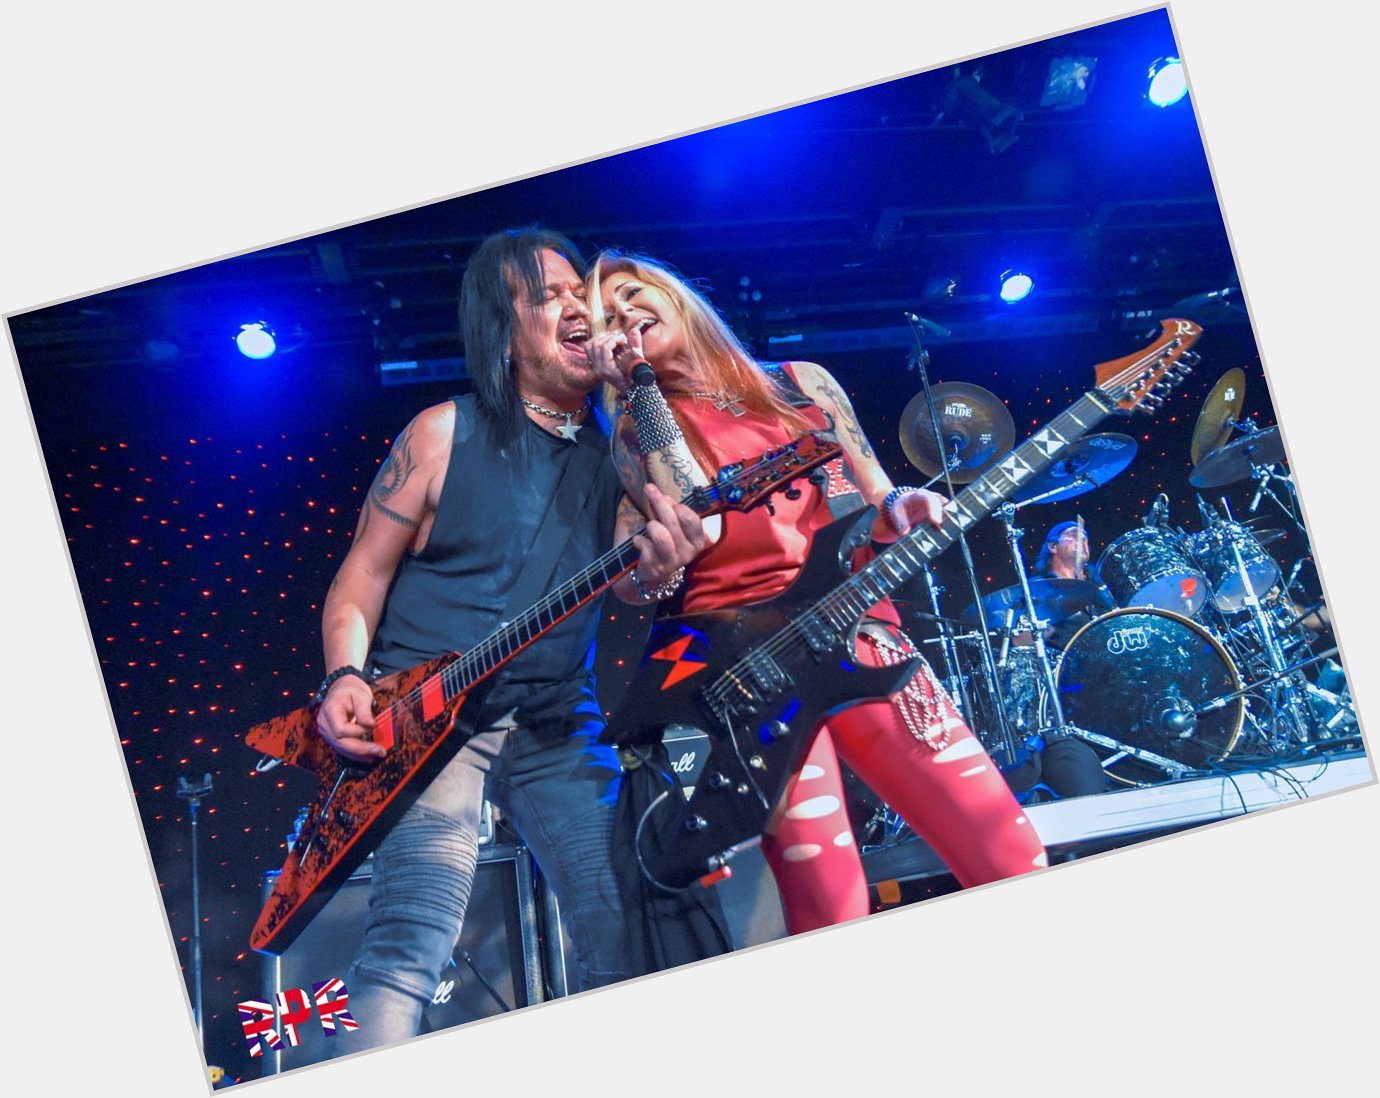 Happy Birthday to Lita Ford, seen here with Patrick Kennison, Monsters Of Rock Cruise 2018 